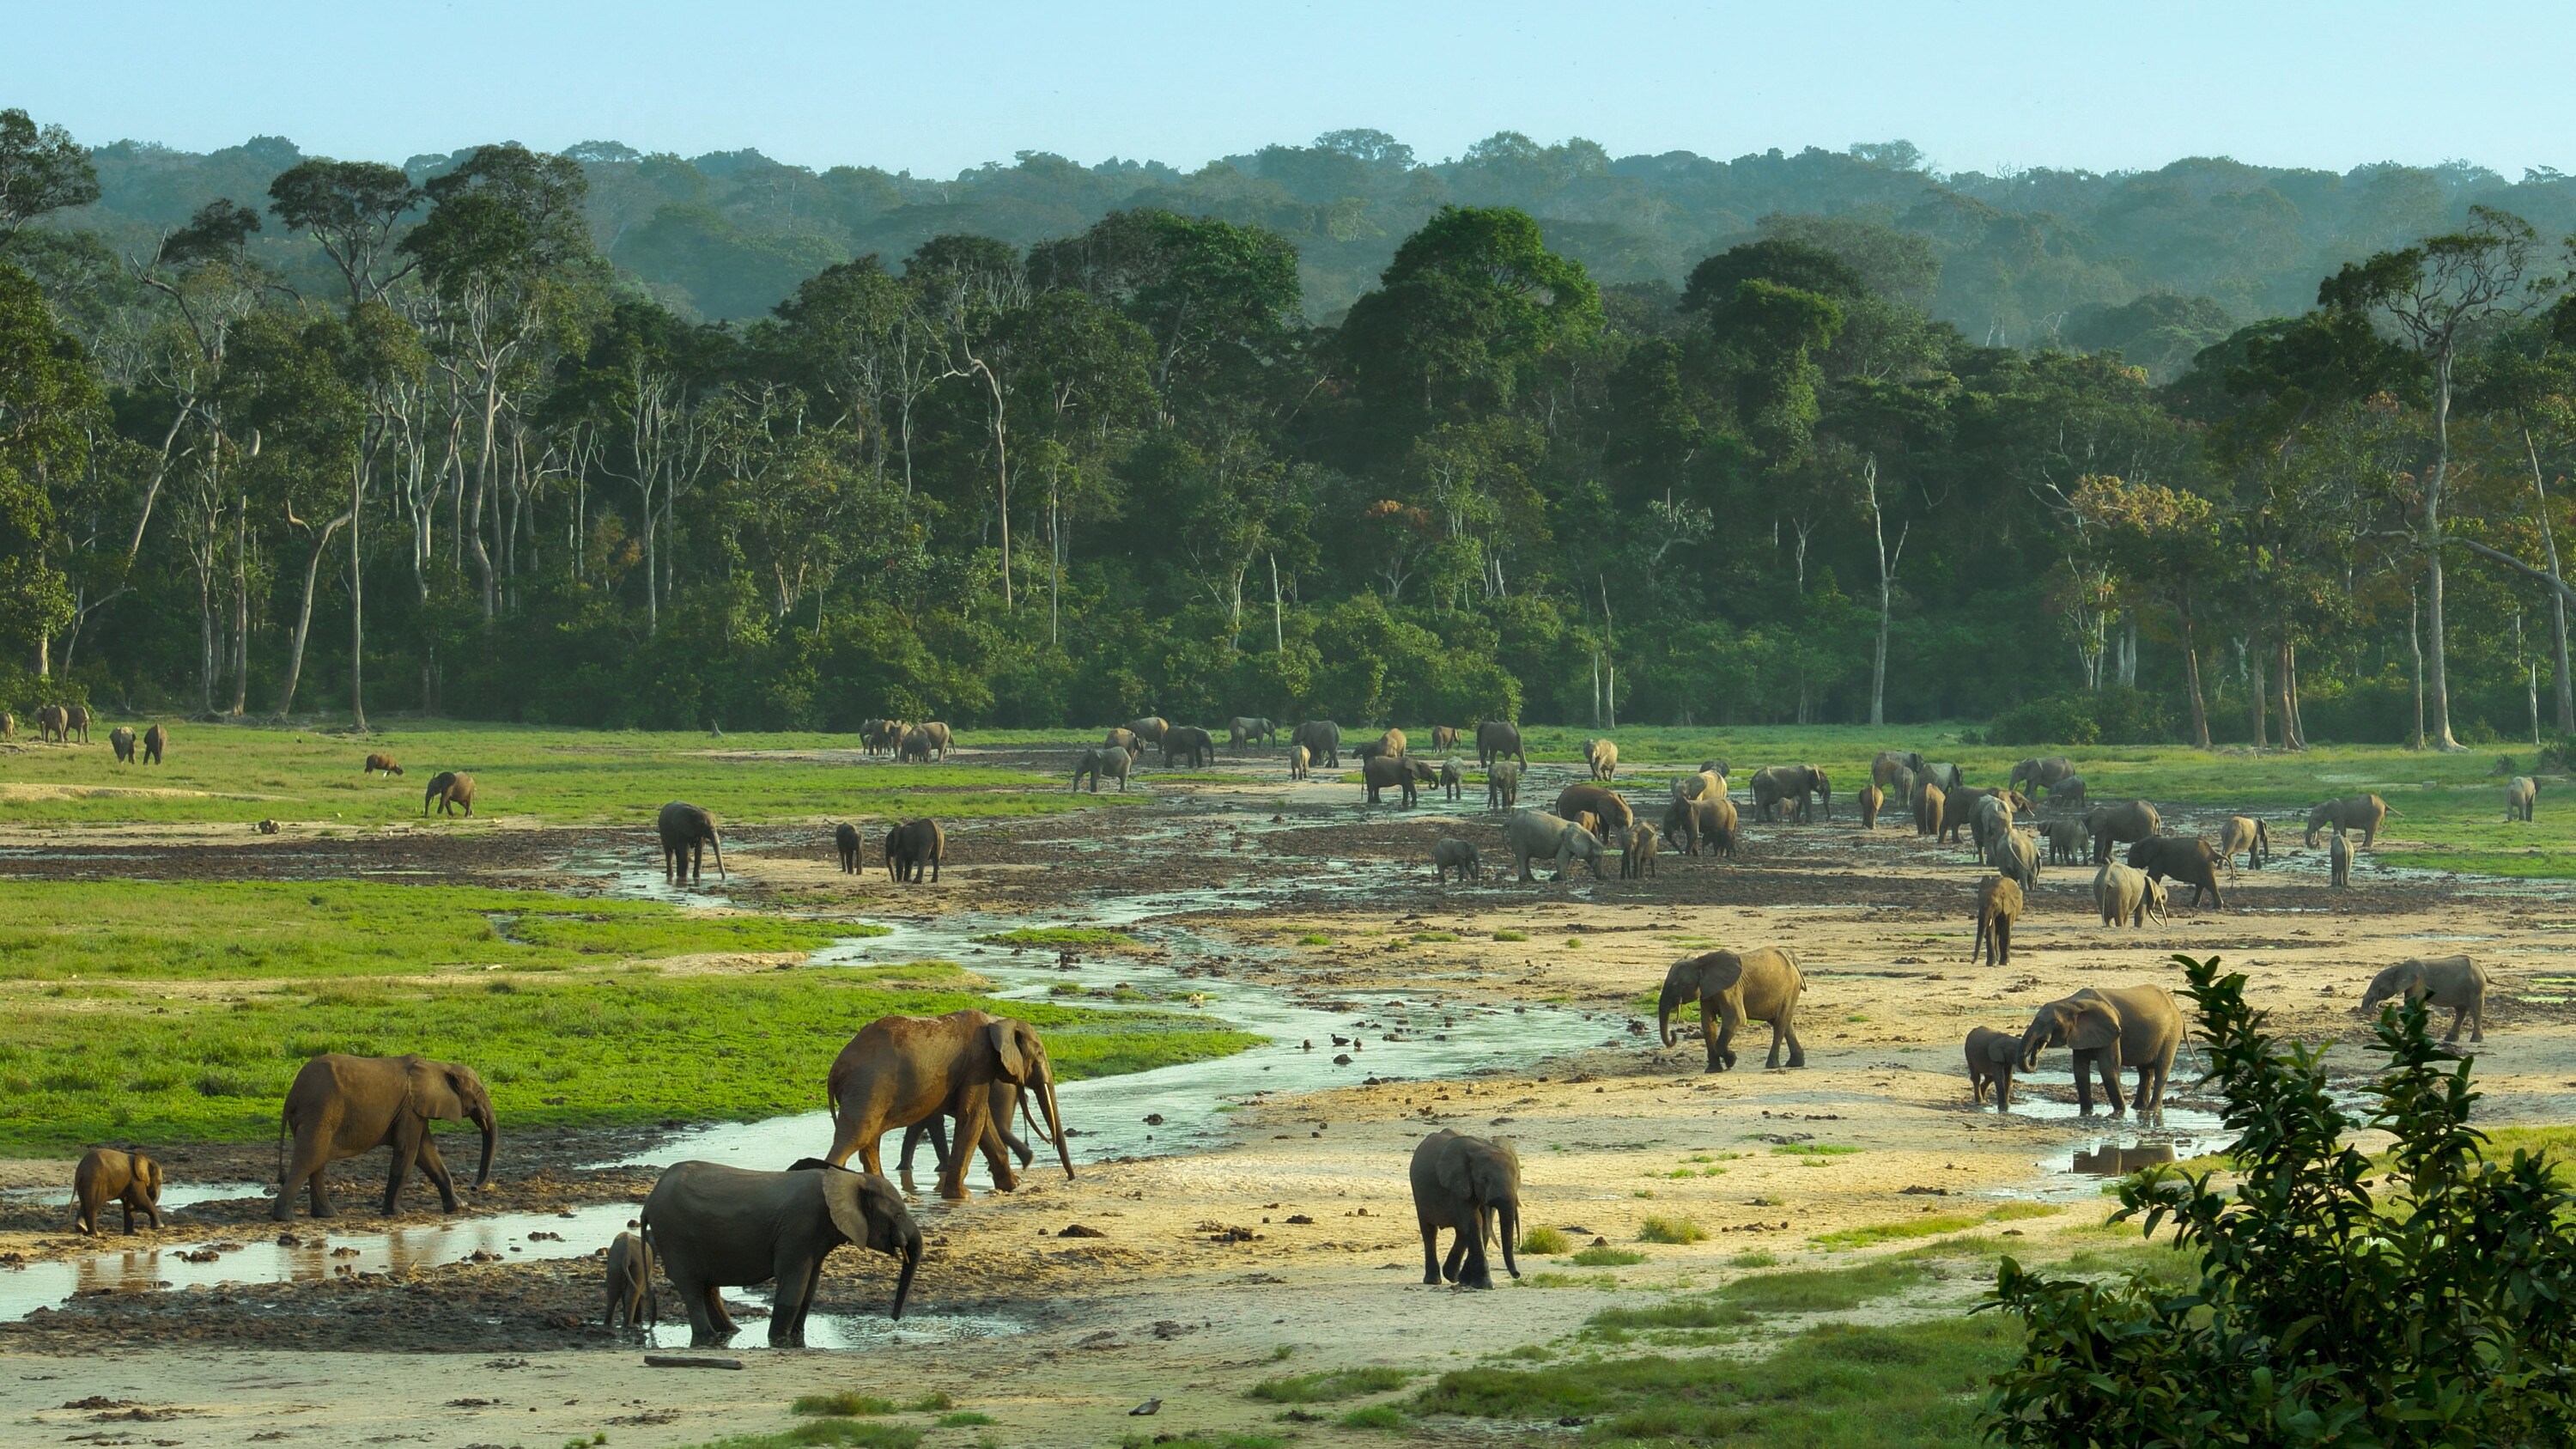 Elephants on the Bai. (National Geographic for Disney+/Bertie Gregory)